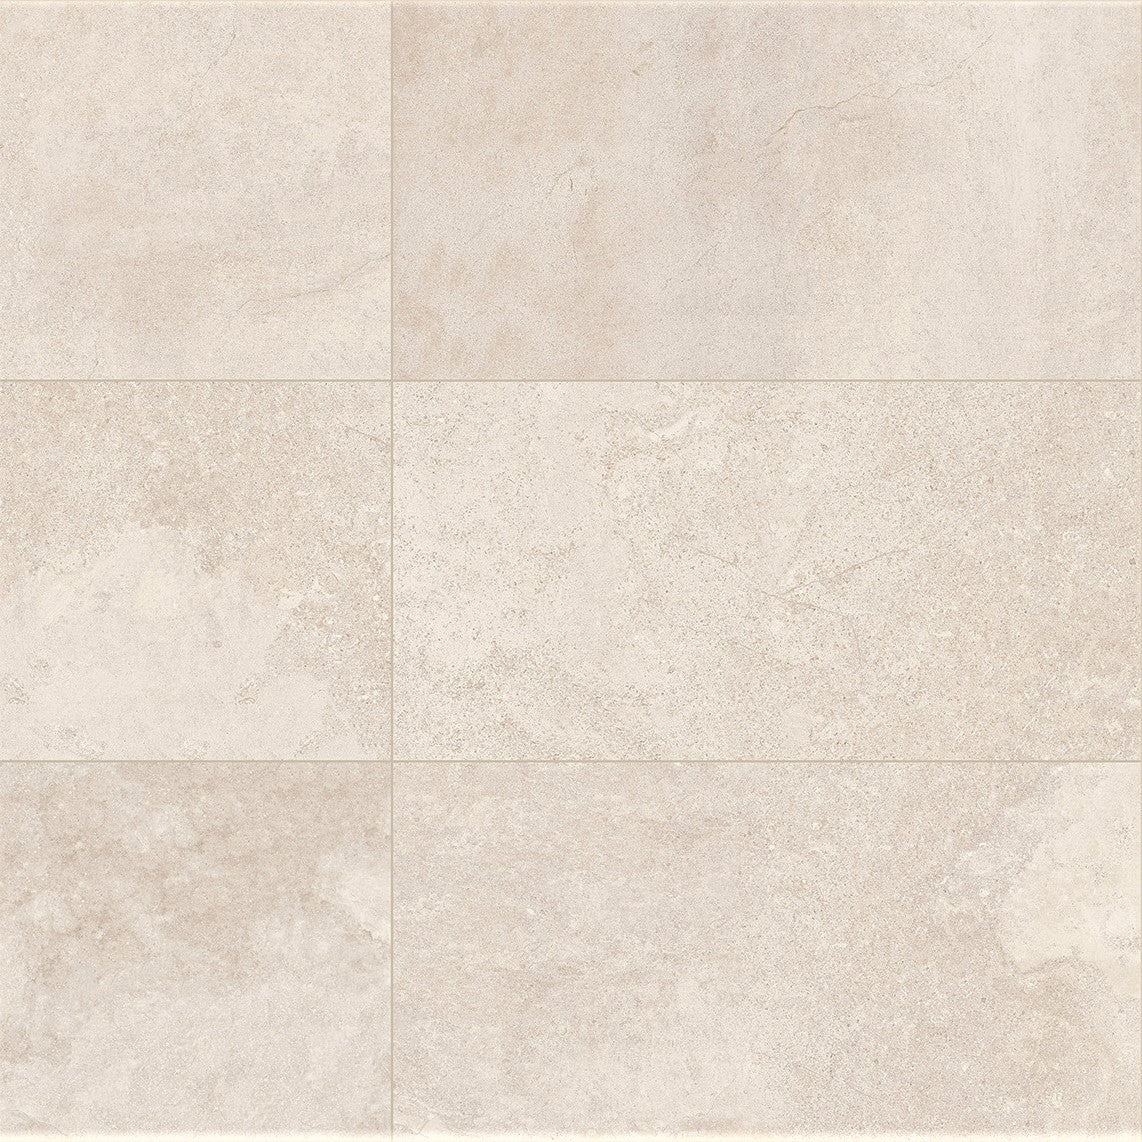 surface group international frontier 20 porcelain paving tile limestone beige 24x48 for outdoor application manufactured by landmark